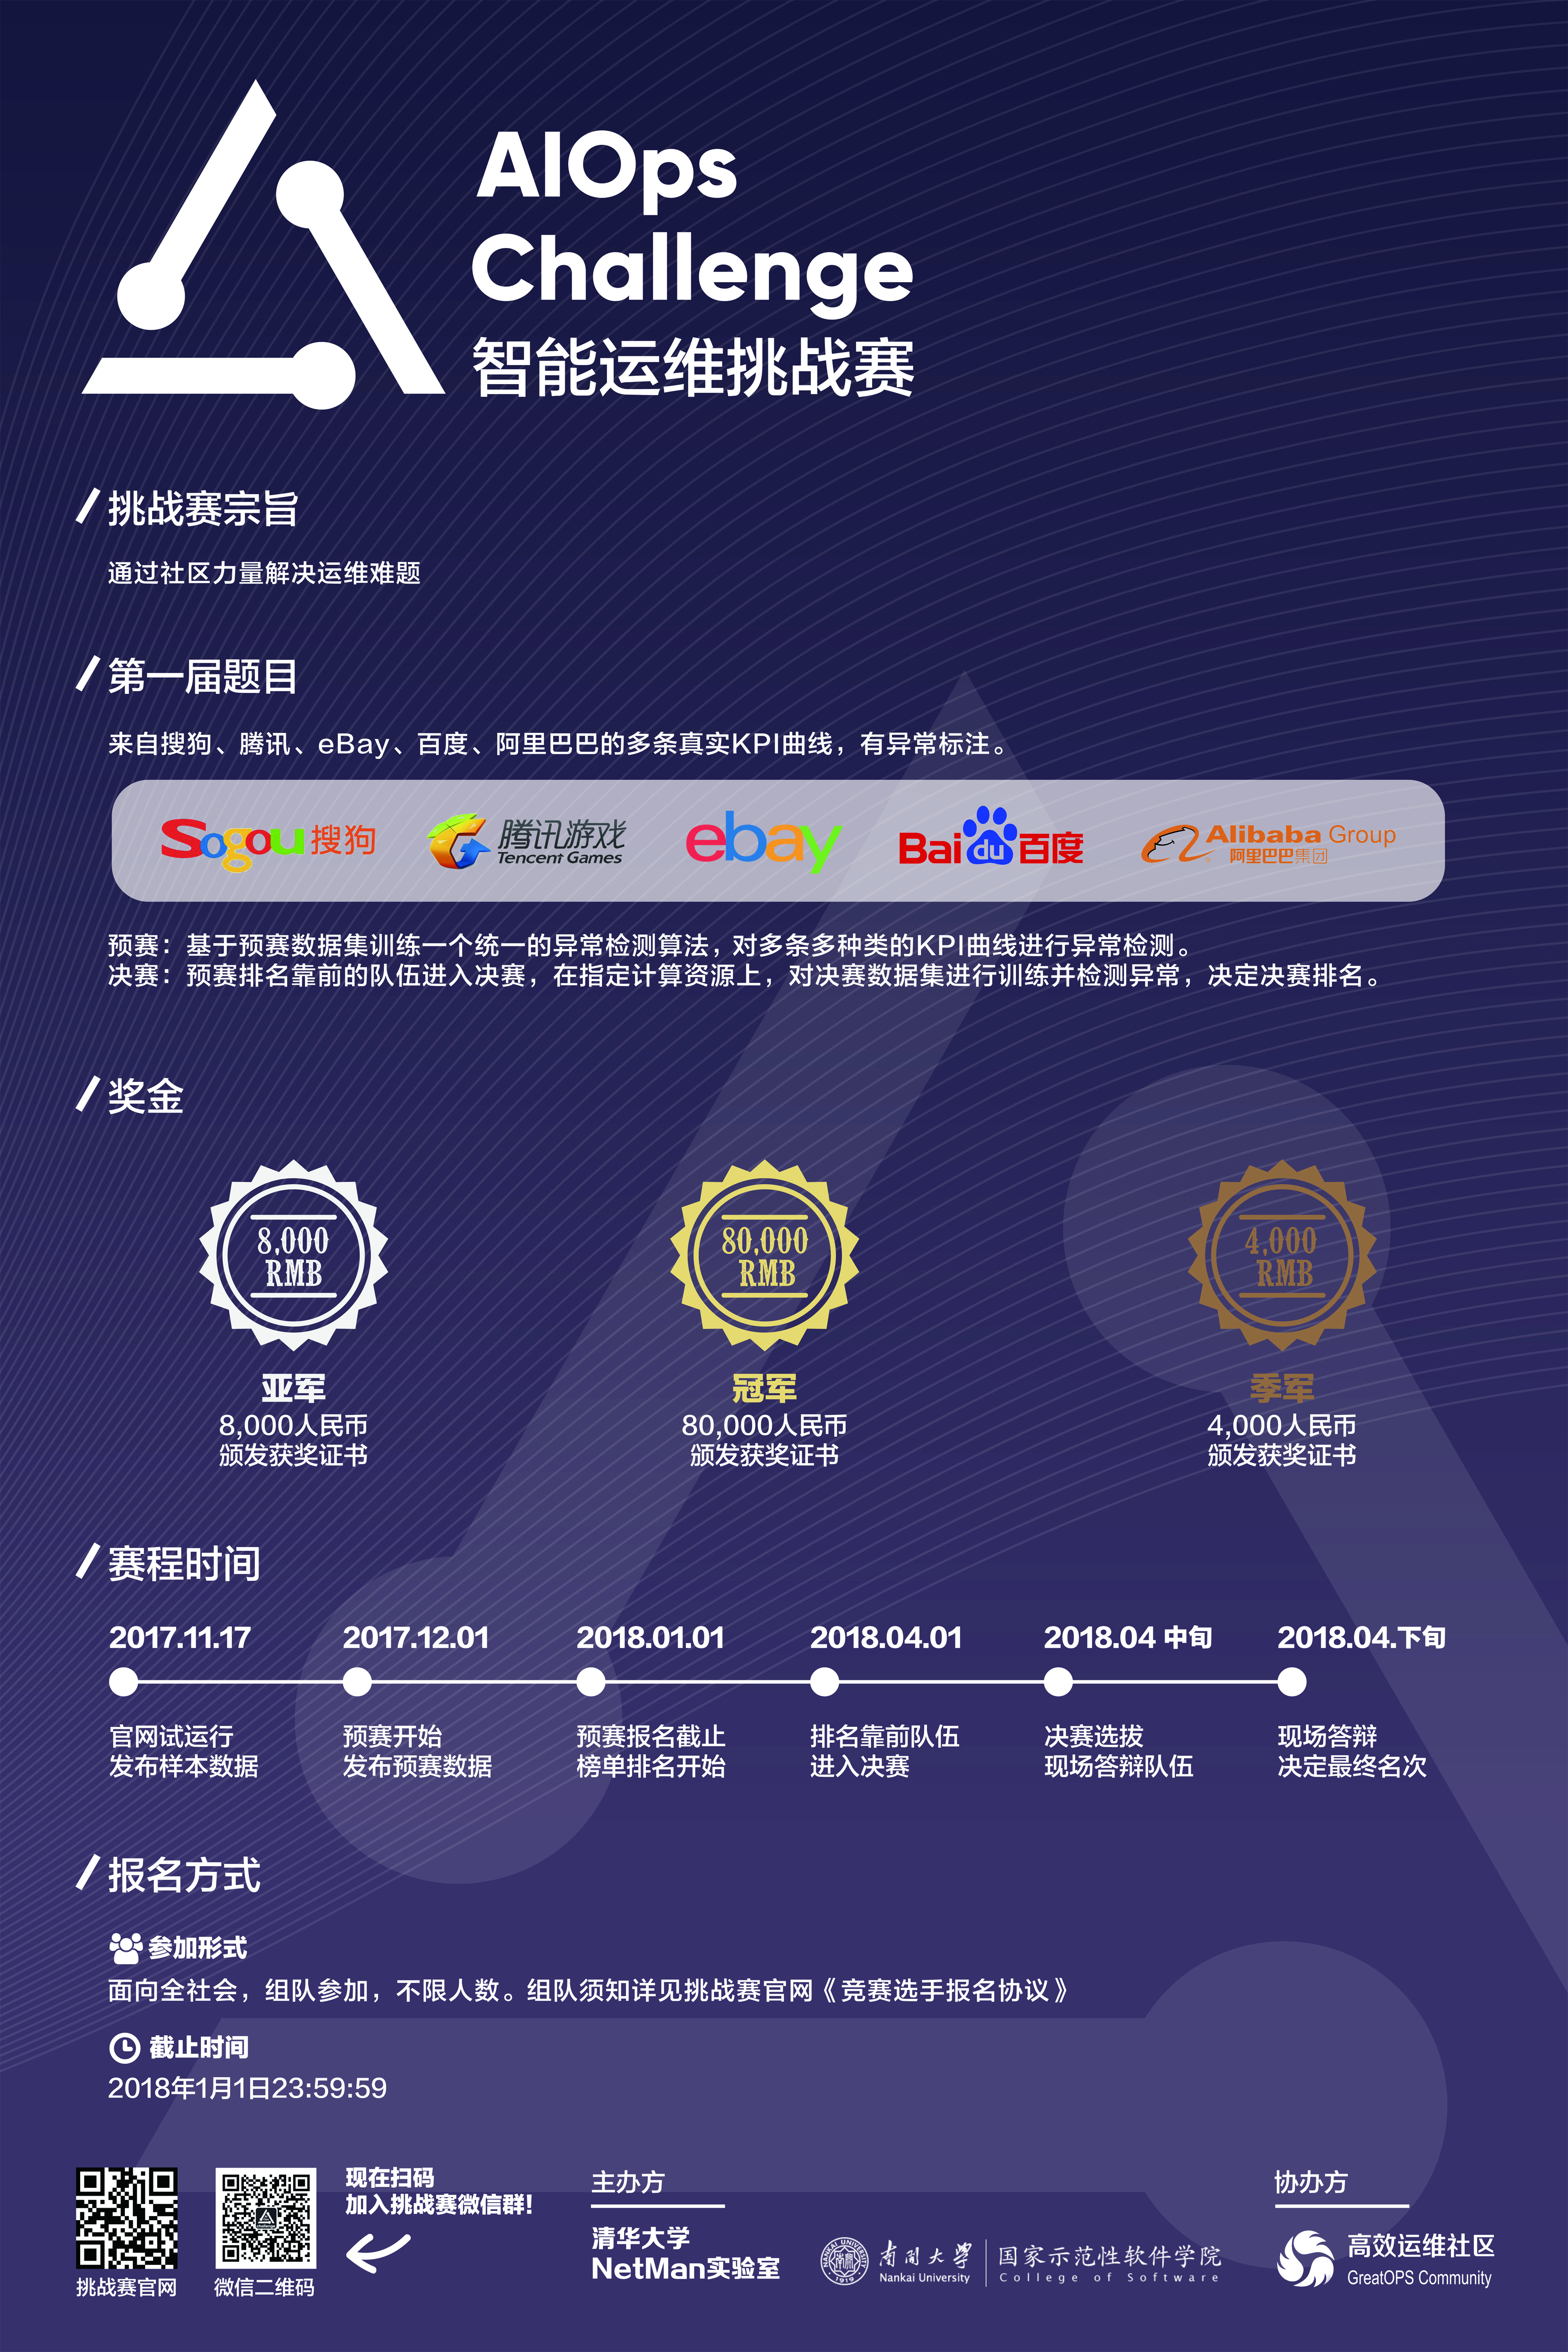 Dan unveiled the algorithm competition  “AIOps Challenge” at GOPS 2017 Shanghai and delivered a talk “Roadmap to AIOps Challenge”.